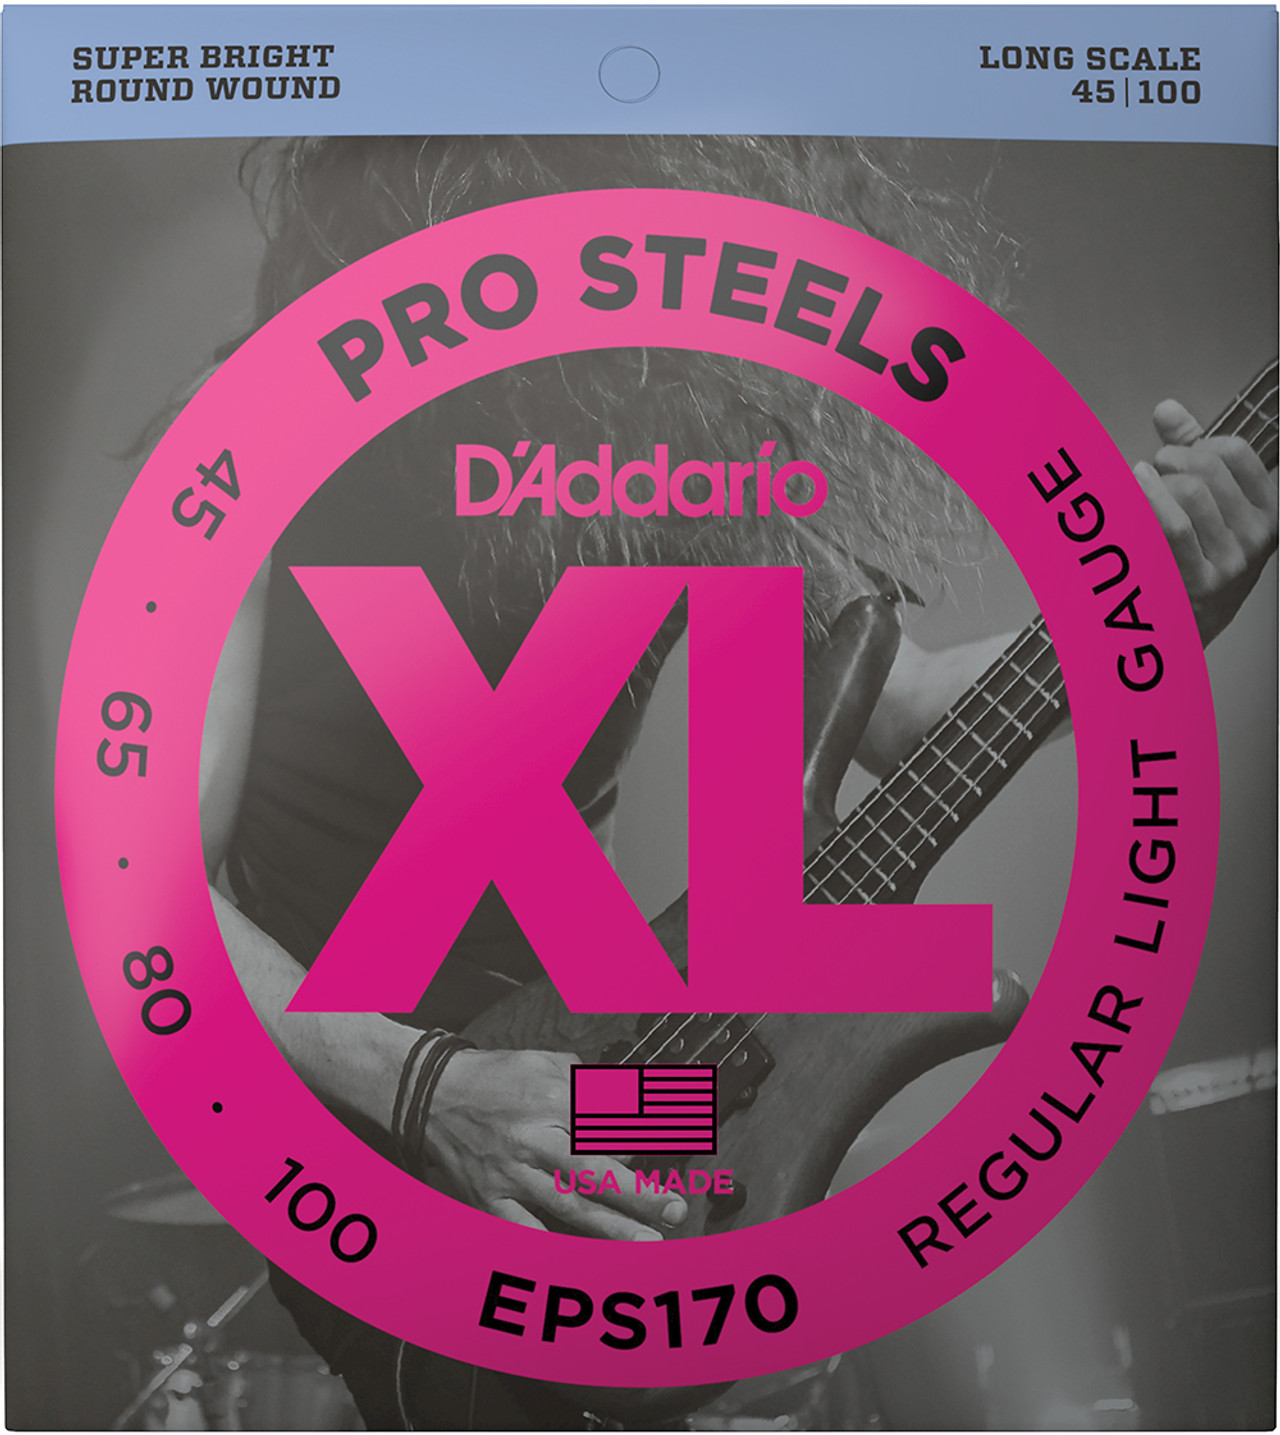 D'Addario XL ProSteels Electric Bass Guitar Strings EPS170 Long Scale Light 45-100